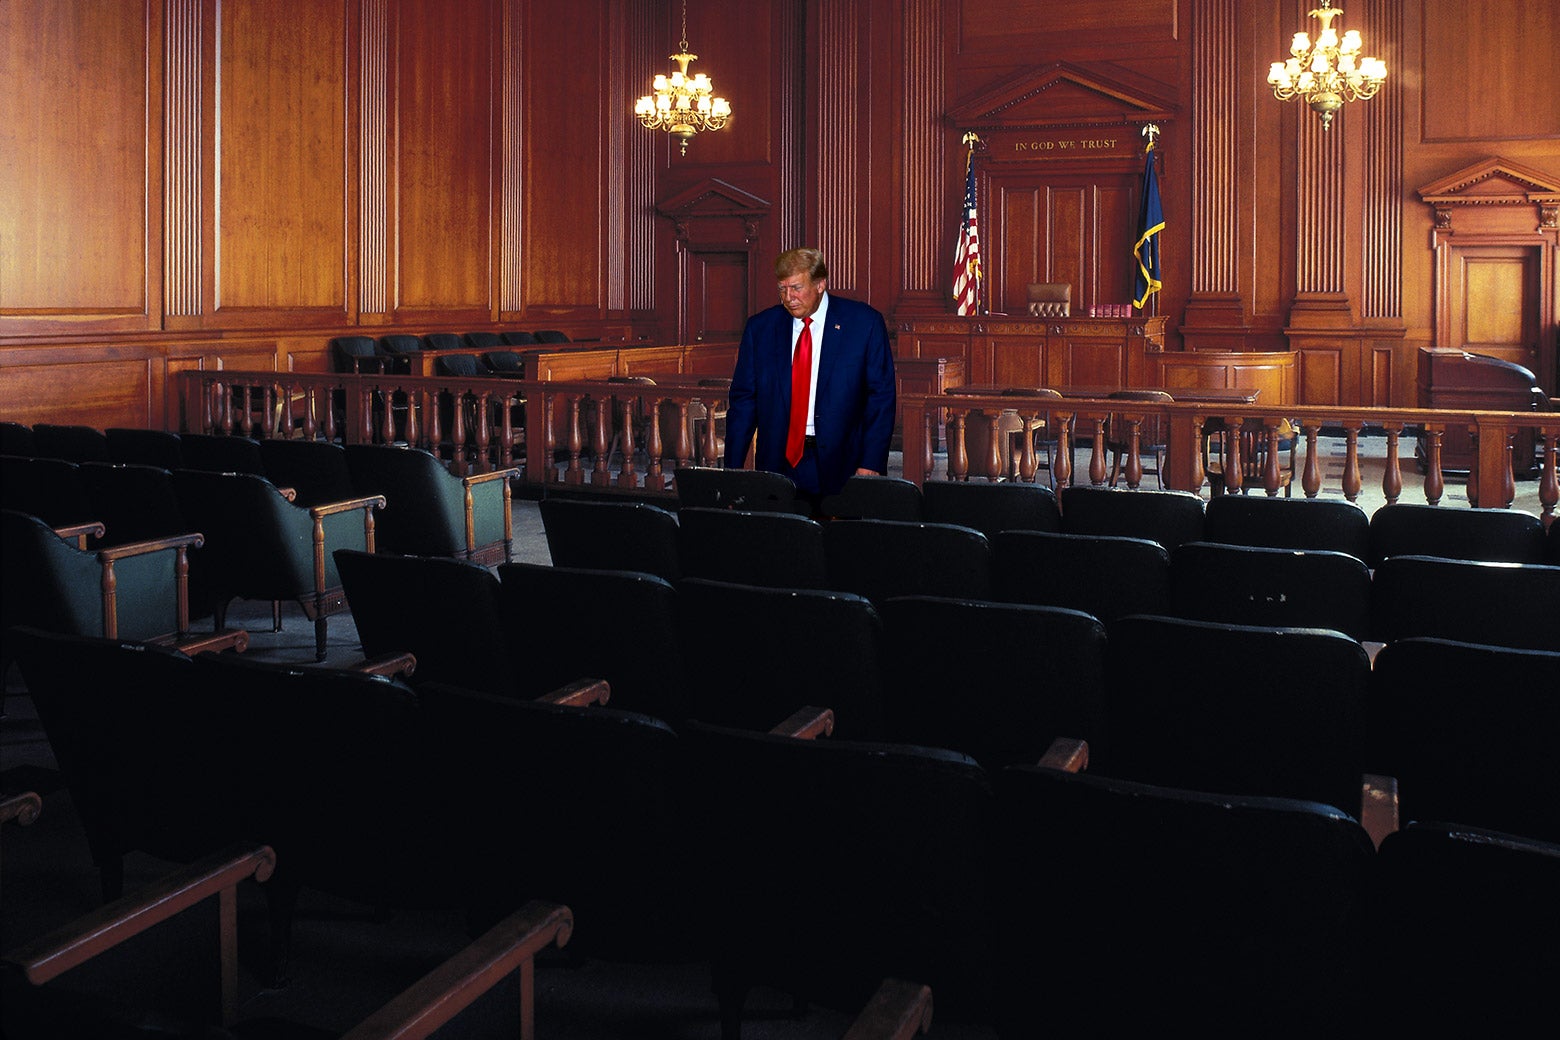 Donald Trump stands in an empty courtroom.